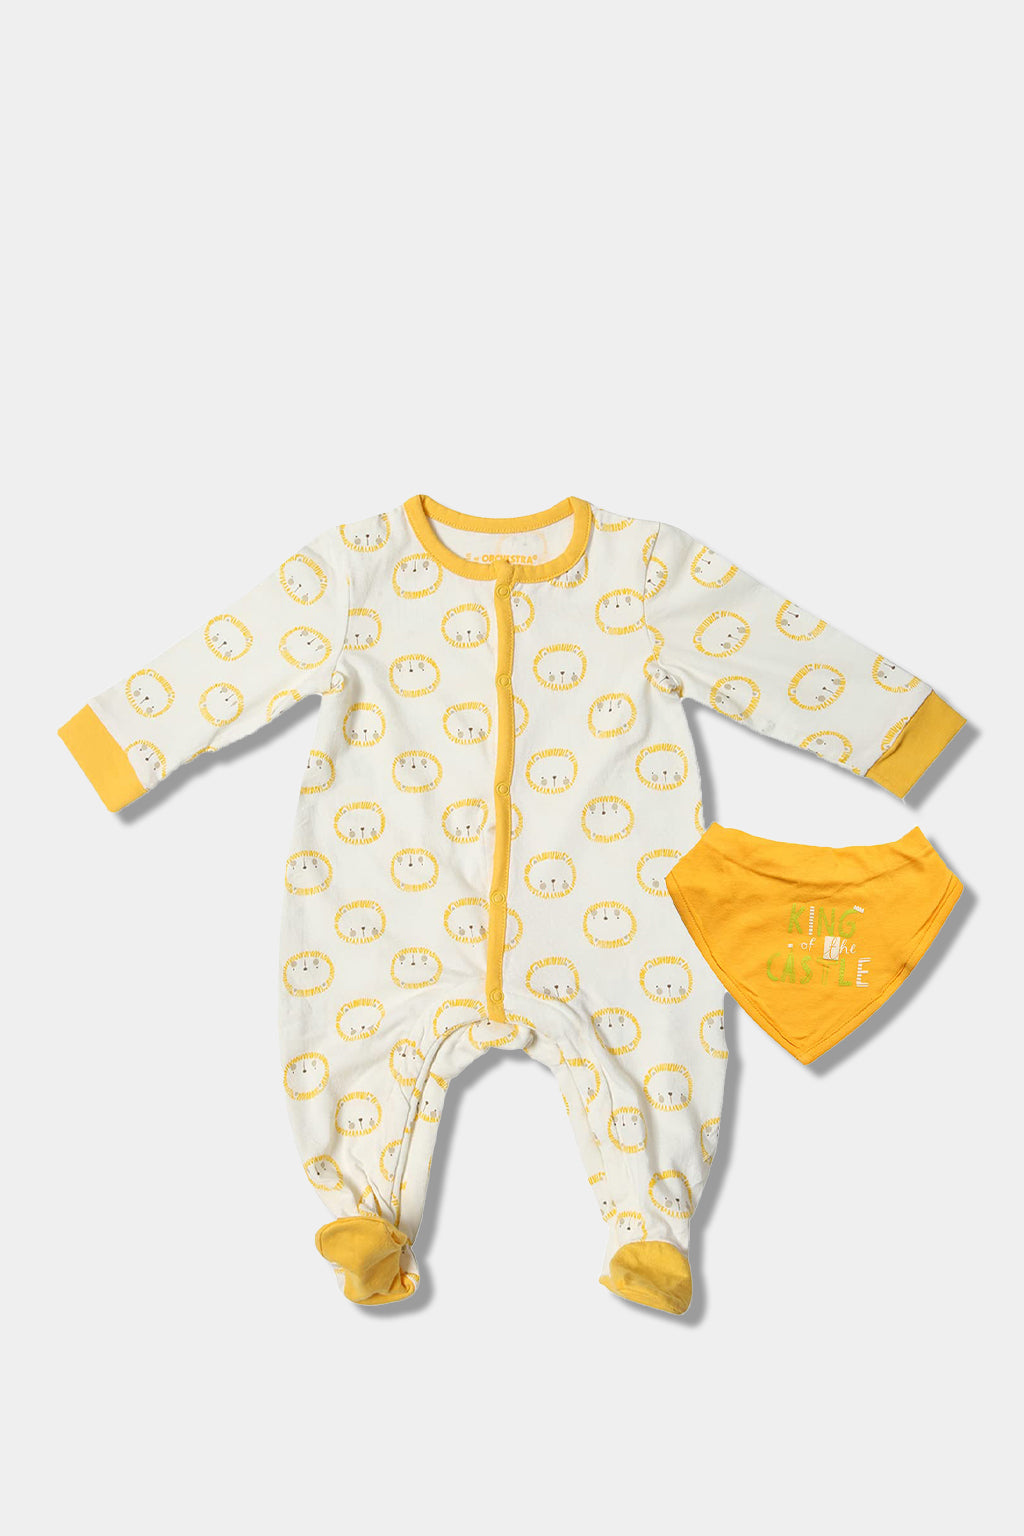 Orchestra Bebe - Little Peaches Baby Sleepsuit